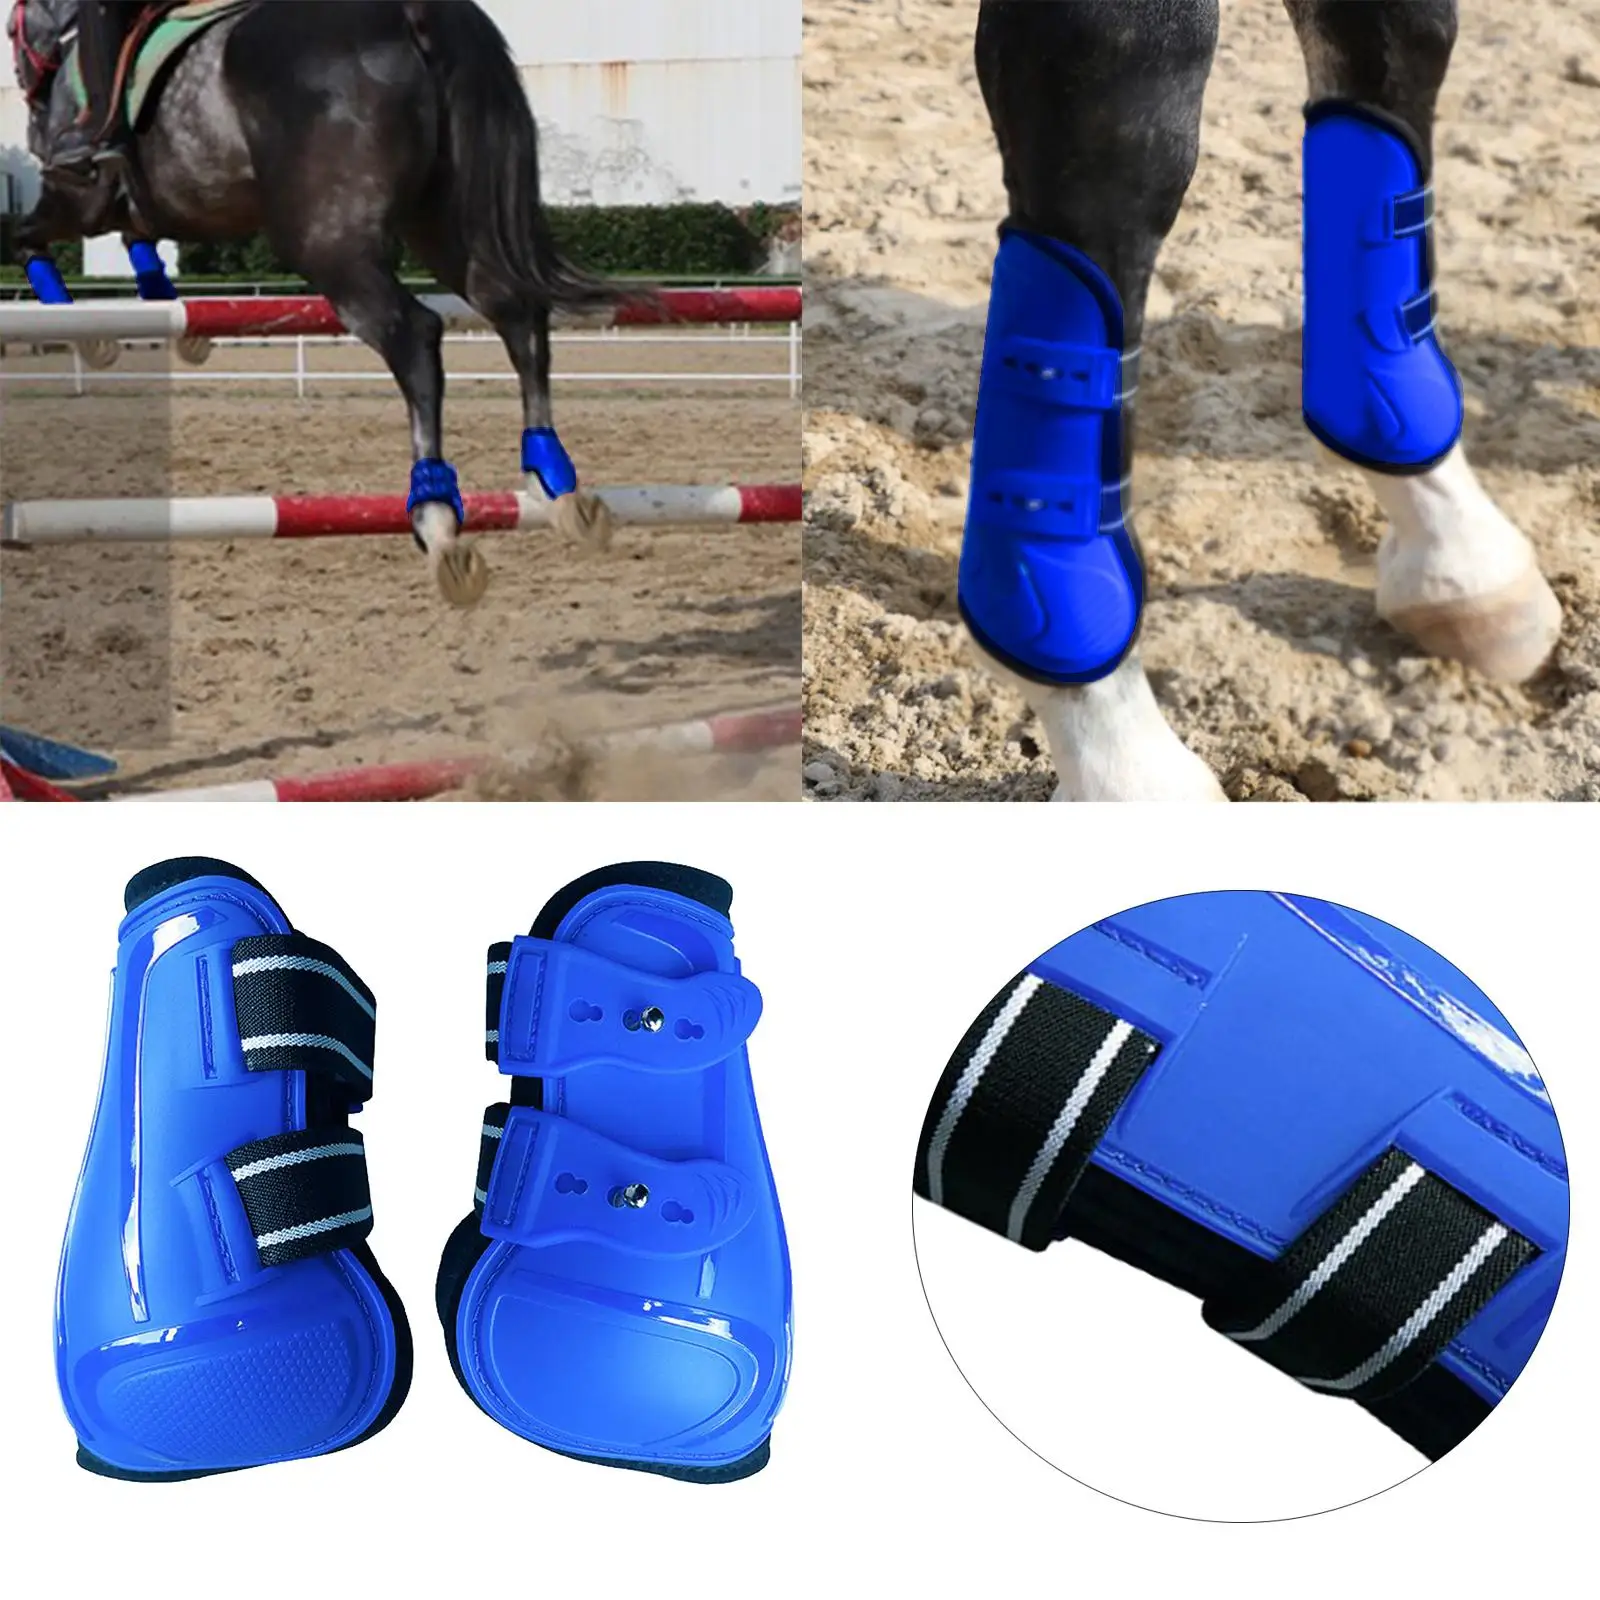 Equestrian  Adjustable HorsebCases PU Cup Horsebein Guards Equipment Accessories